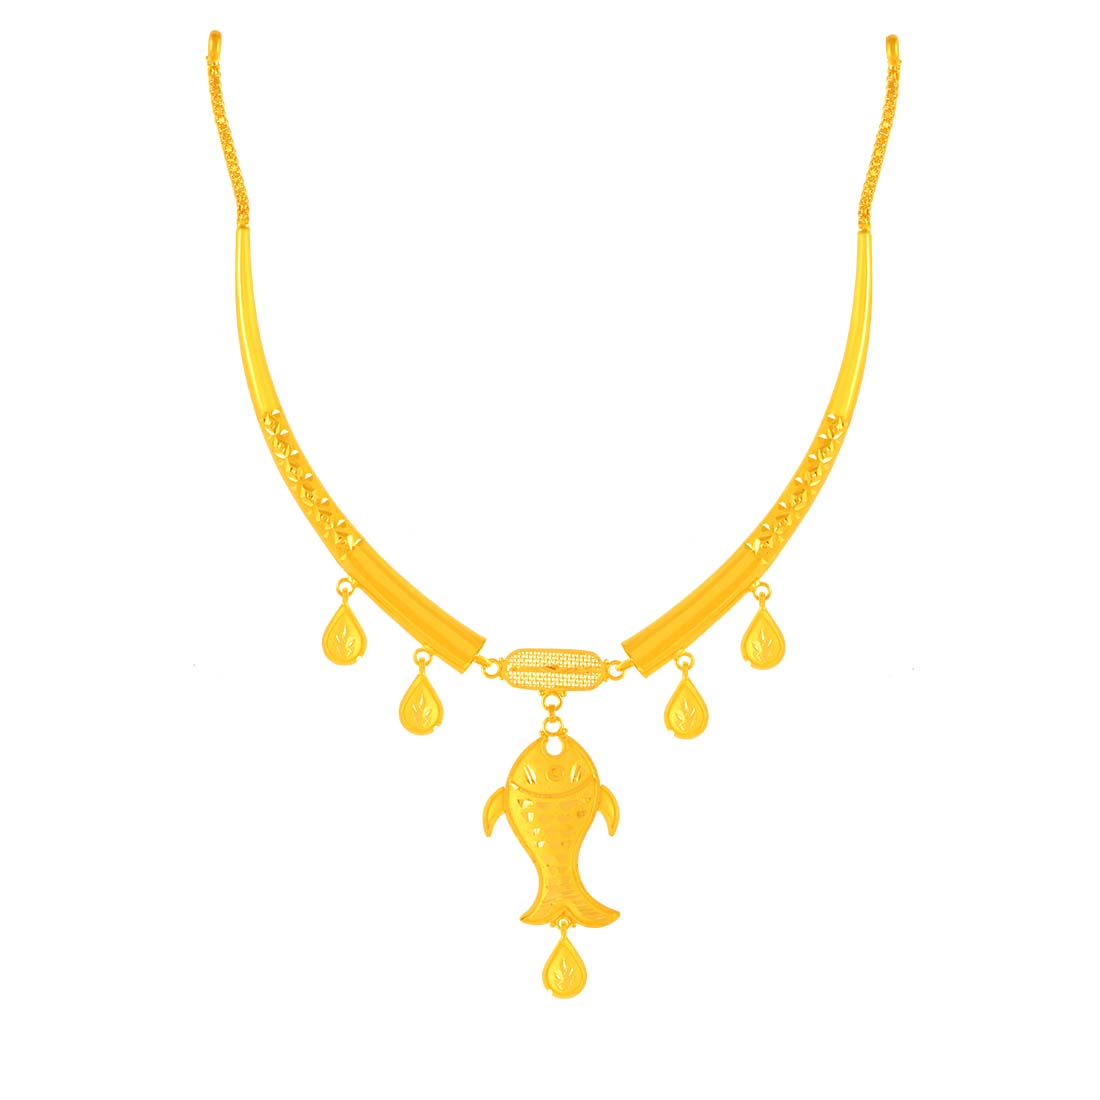 22K Gold Necklace for Women - 235-GN267 in 15.500 Grams